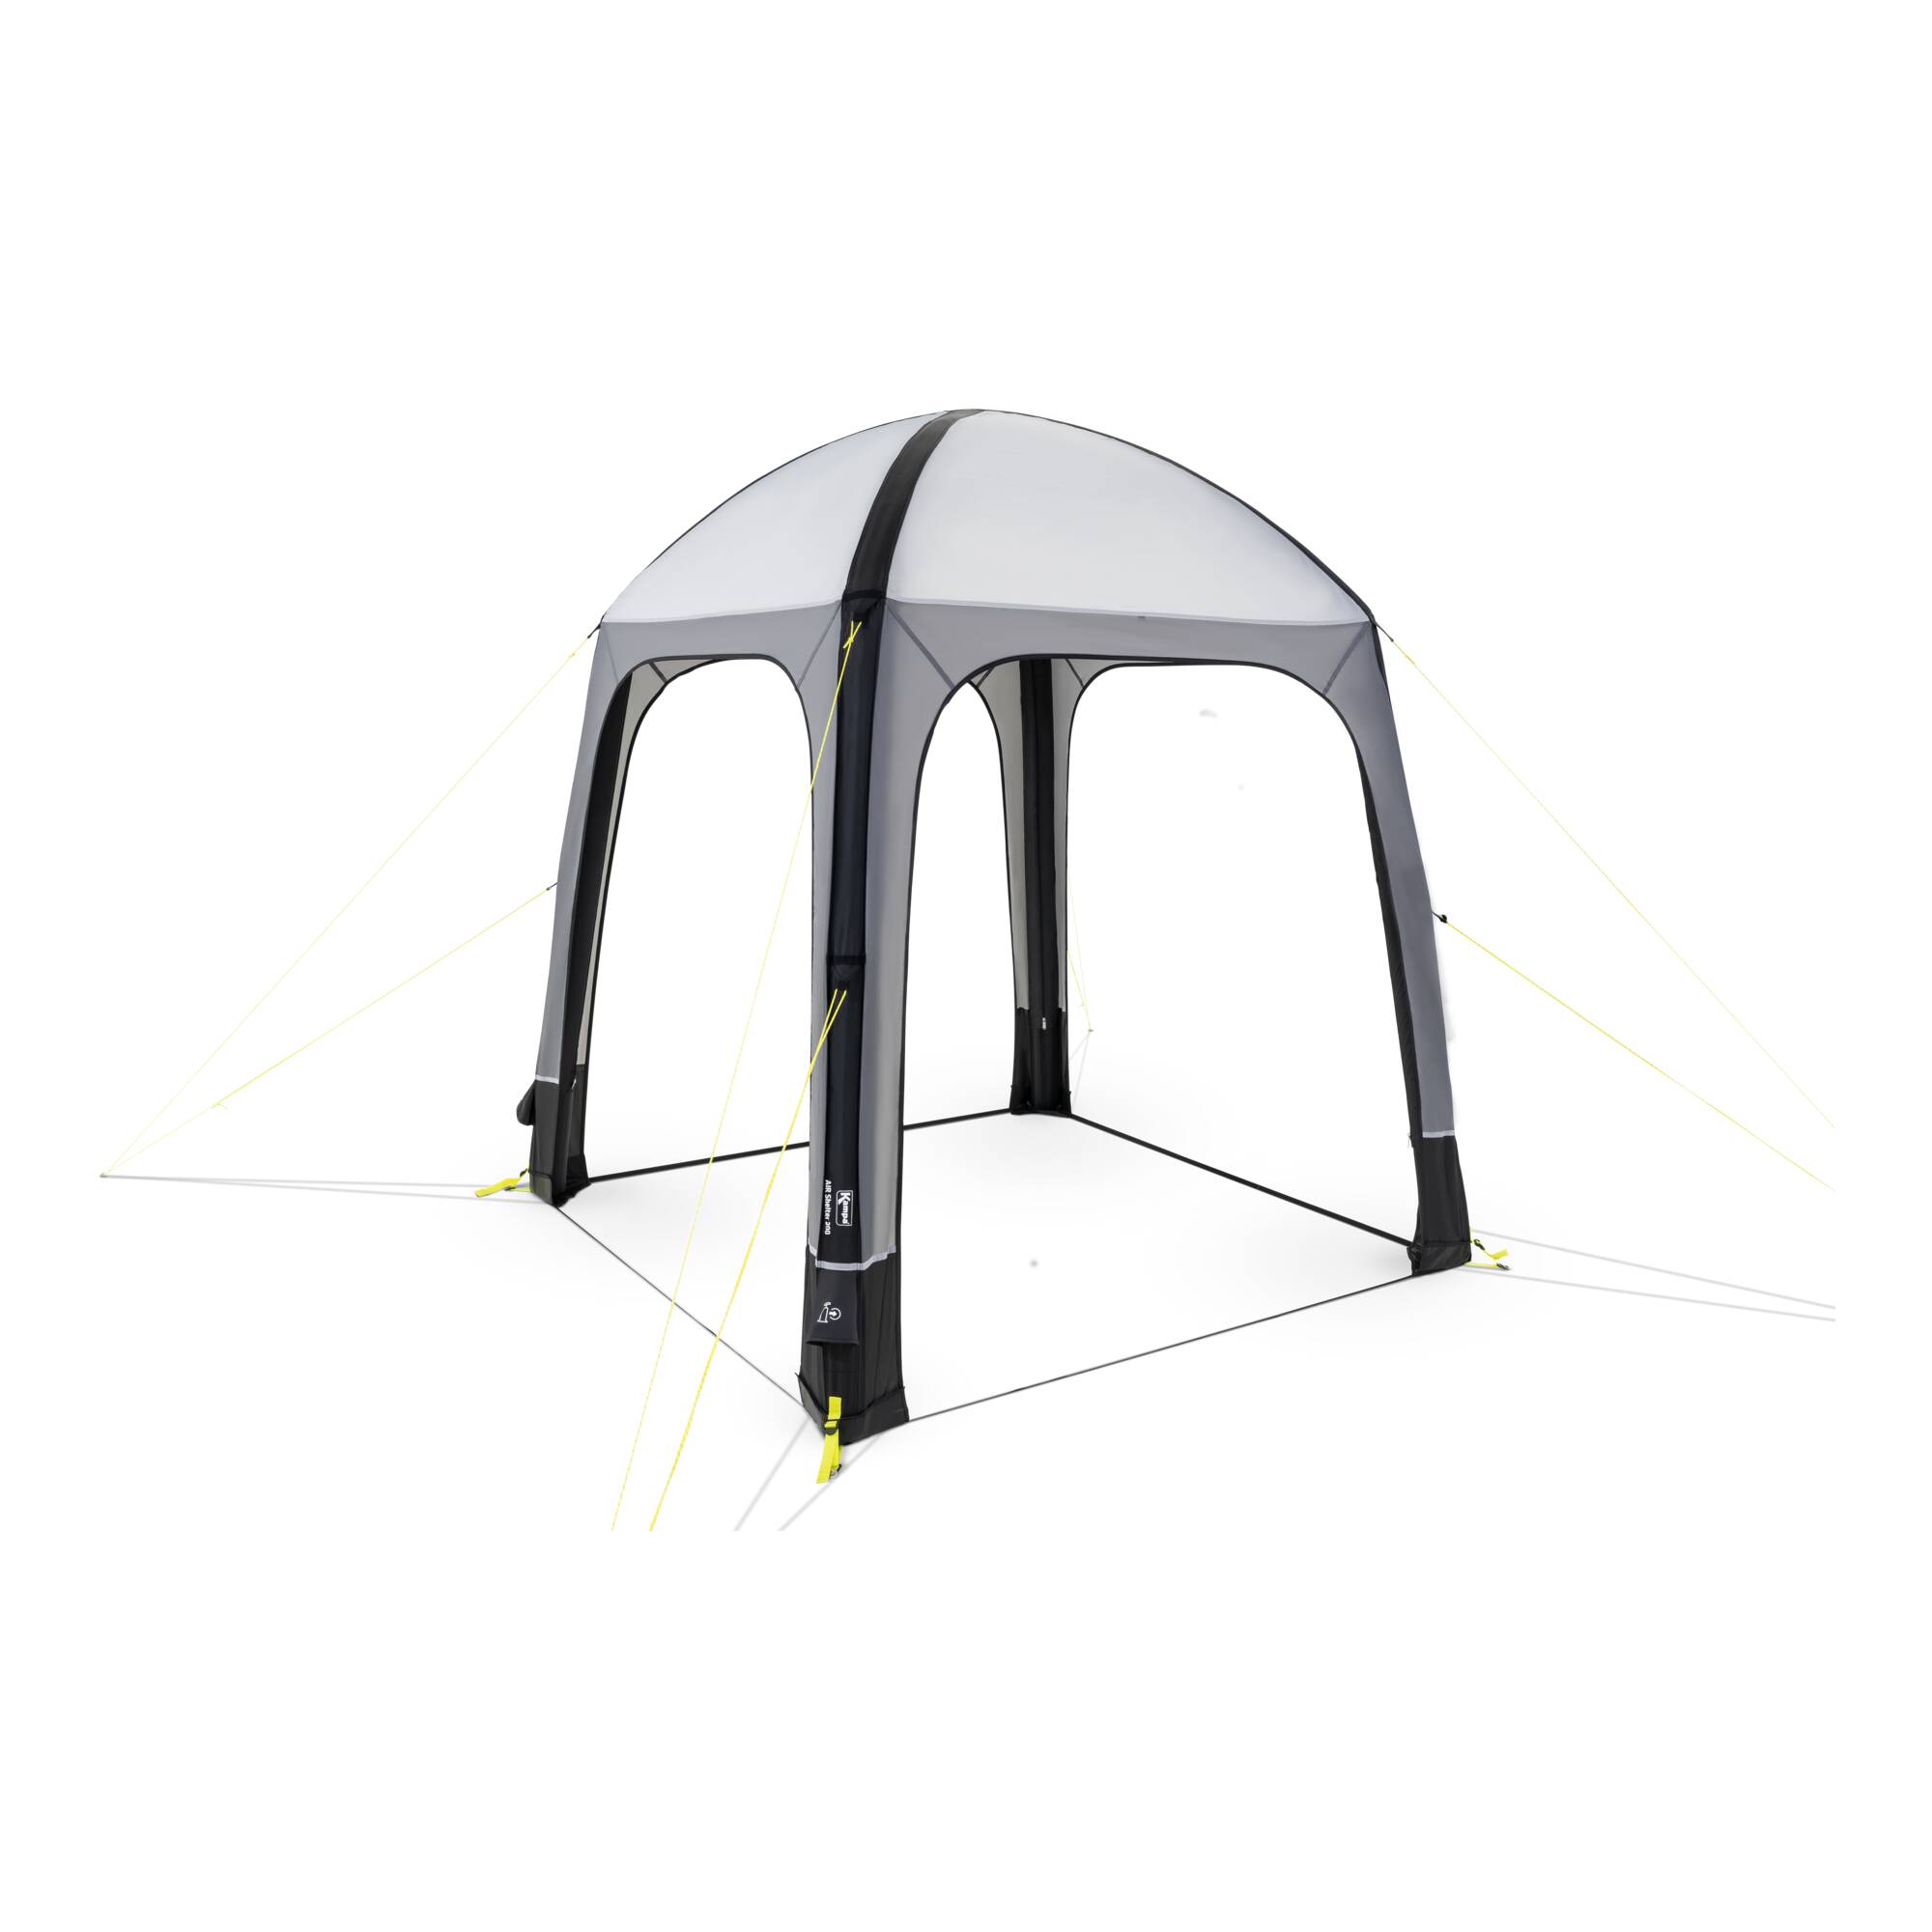 Dometic Air Shelter 200 Tent Spare Parts